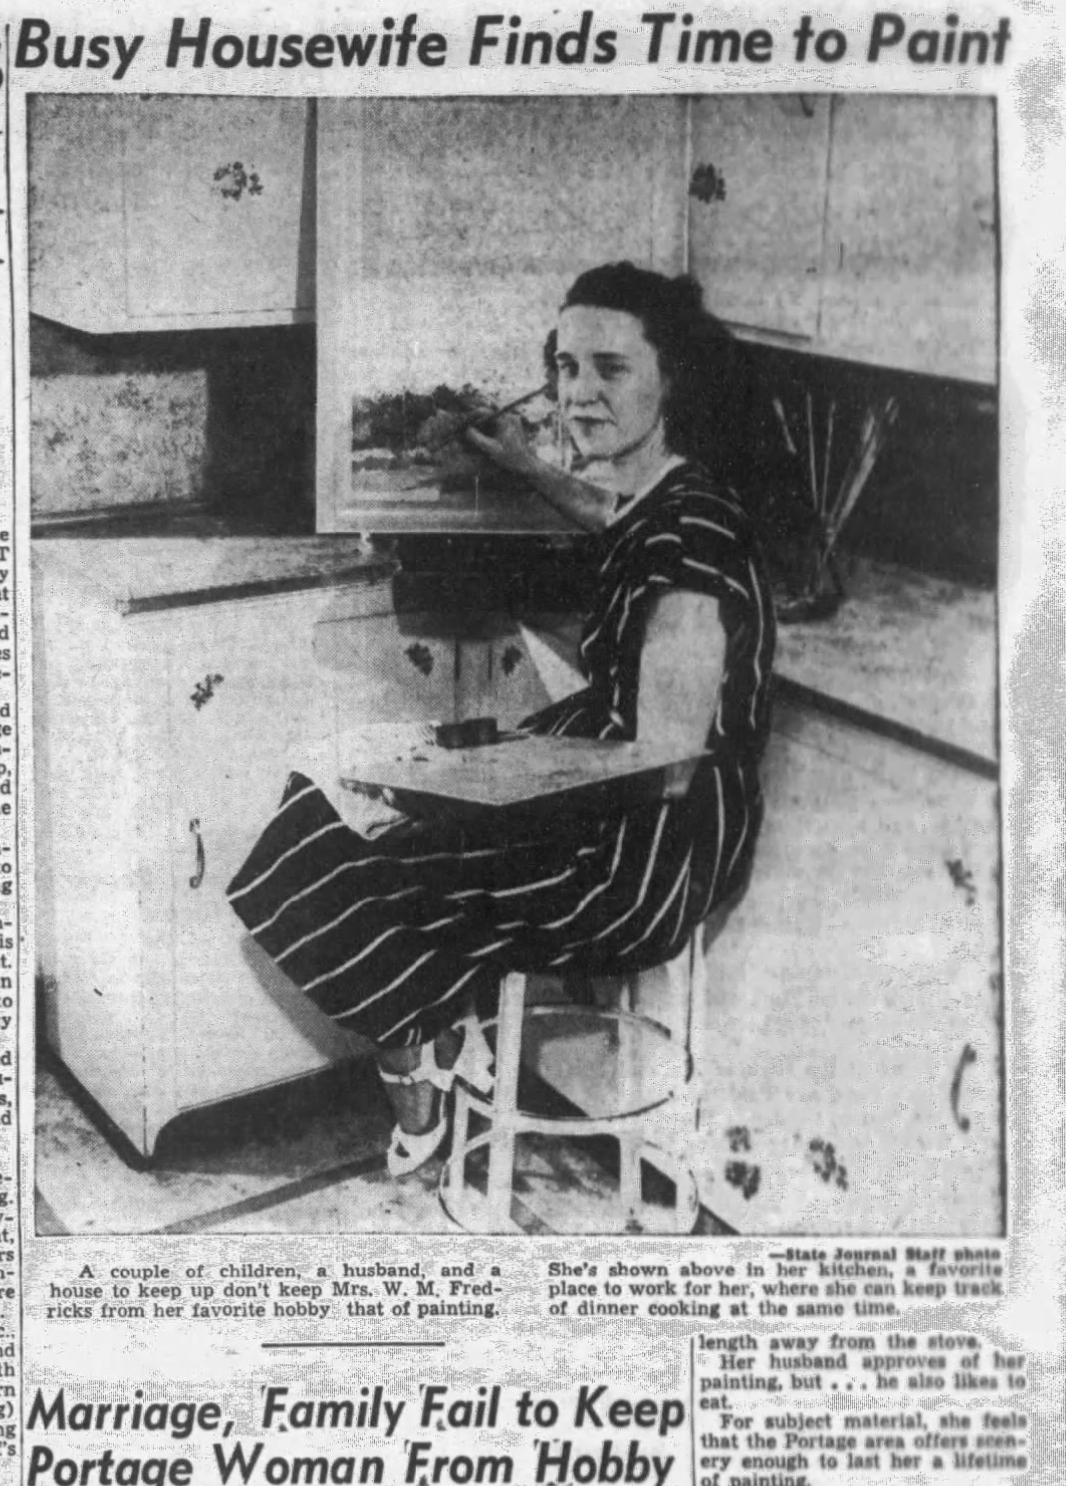 Pictured seated on a kitchen stool with palette and paintbrush before a small painting perched on the counter, Mrs. W.M. Fredricks "can keep track of dinner cooking at the same time."